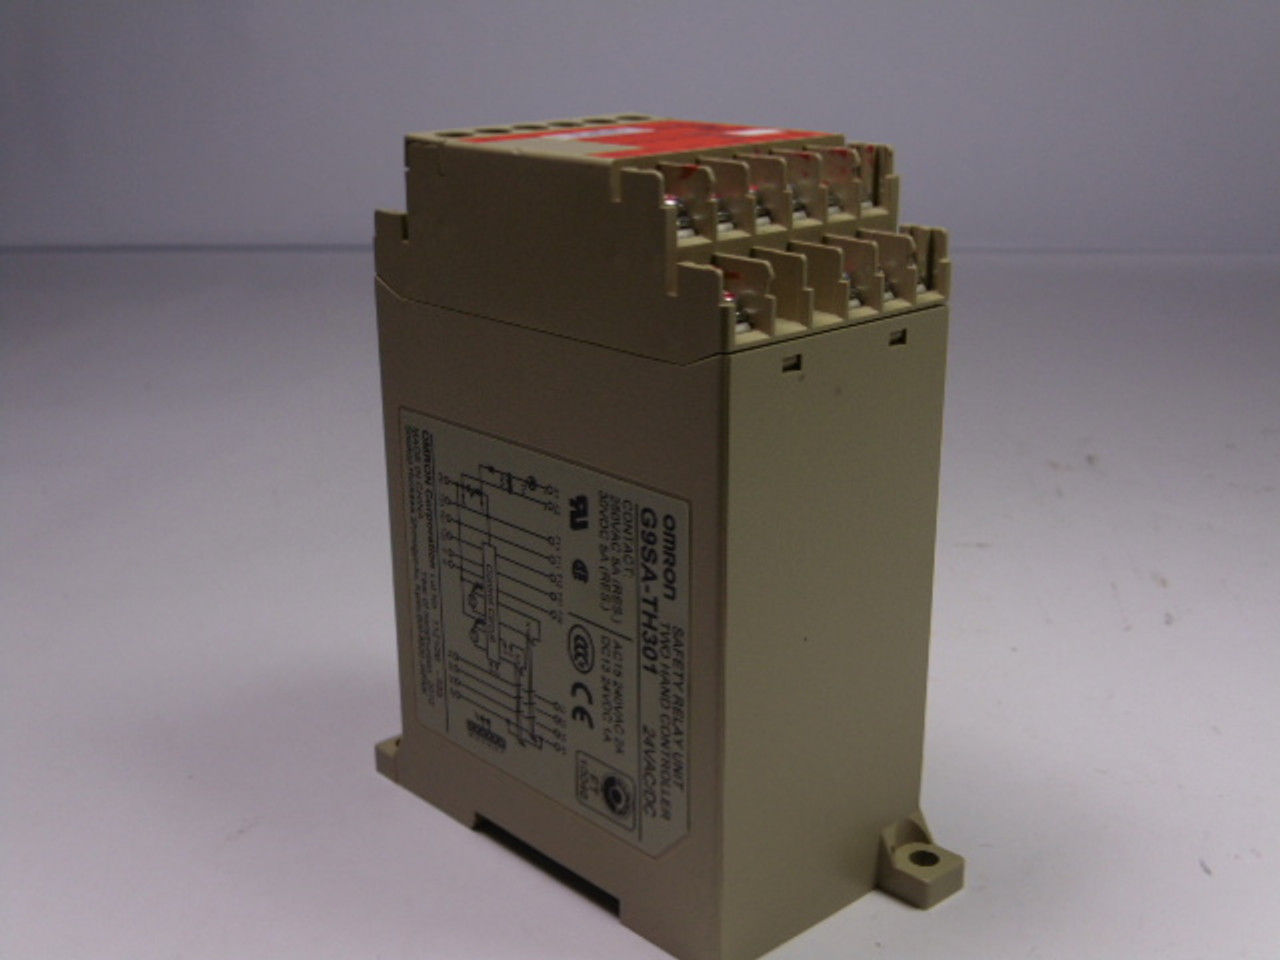 Omron G9SA-TH301 Safety Relay Two Hand Controller USED